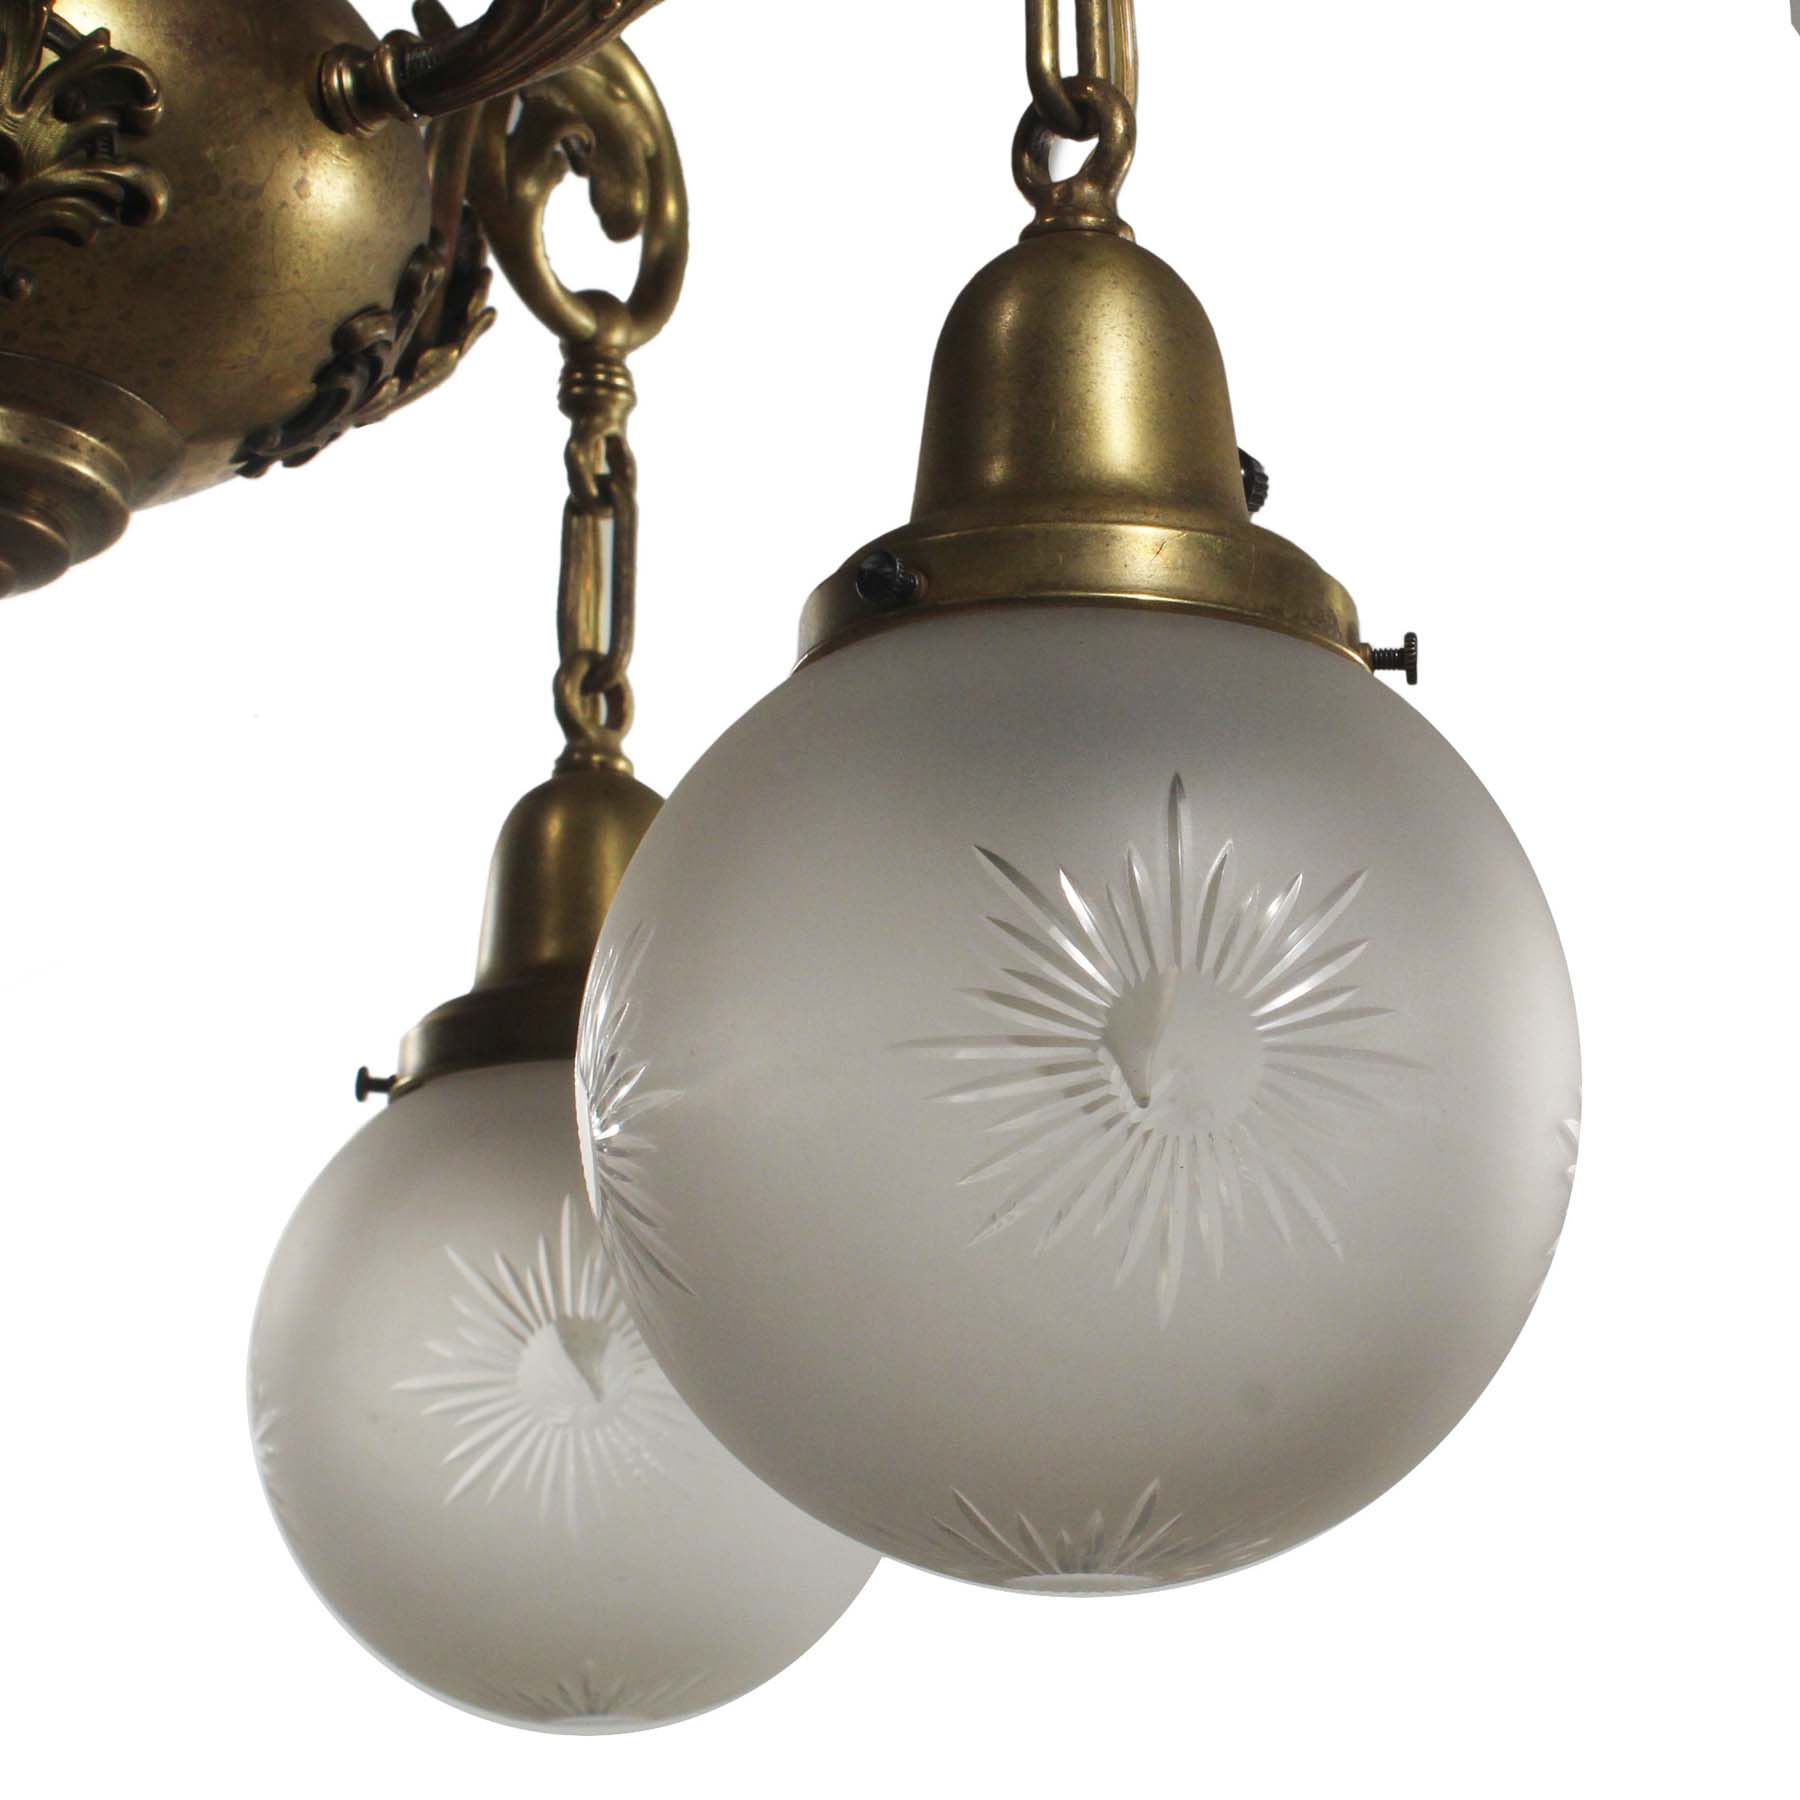 SOLD Neoclassical Chandelier with Wheel Cut Shades, Antique Lighting-67084